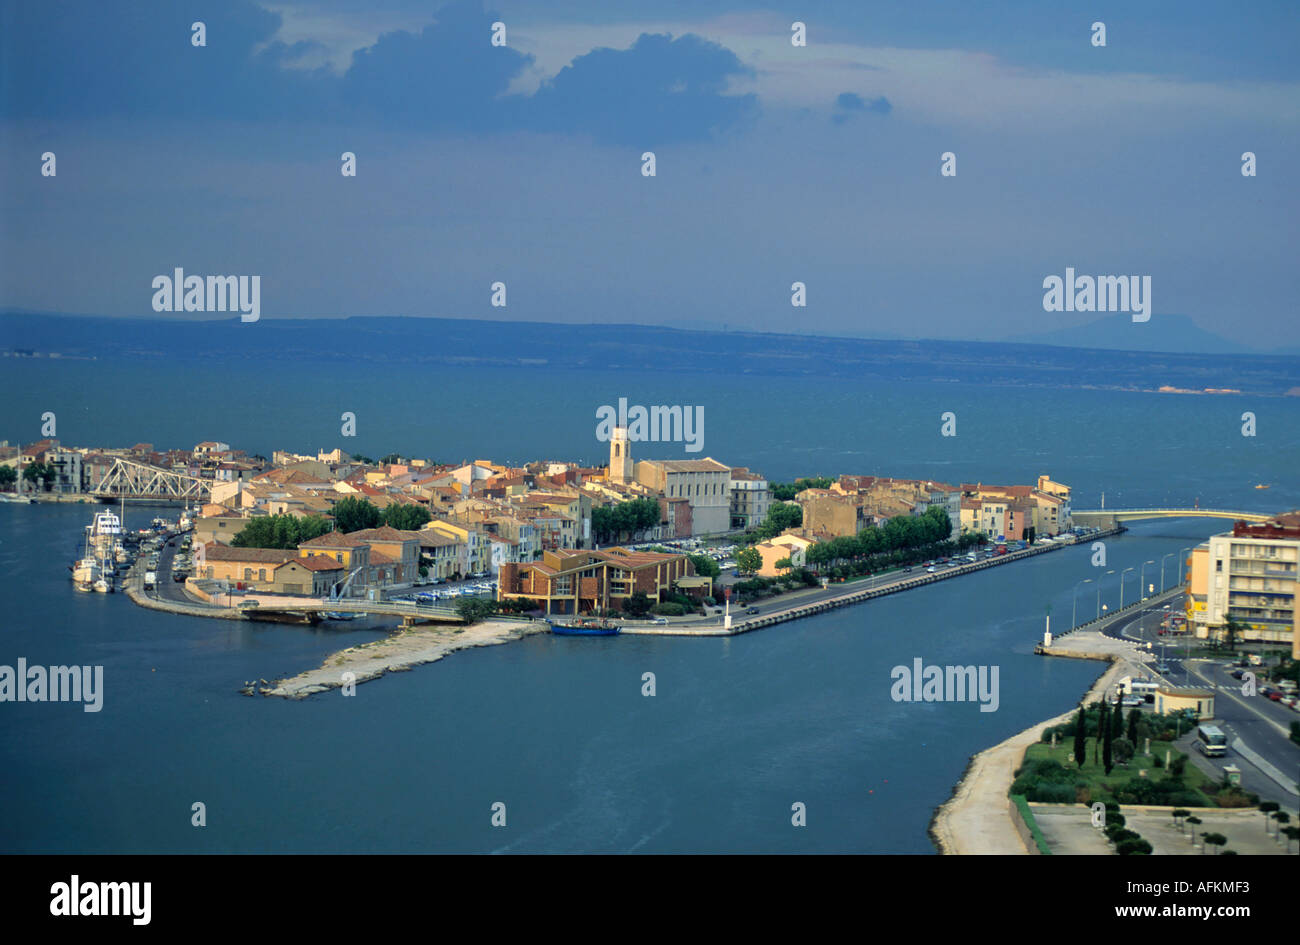 Martigues, Provence, France - The Old Village island in the Etang de Berre  / Berre Lake or Pond at dusk Stock Photo - Alamy